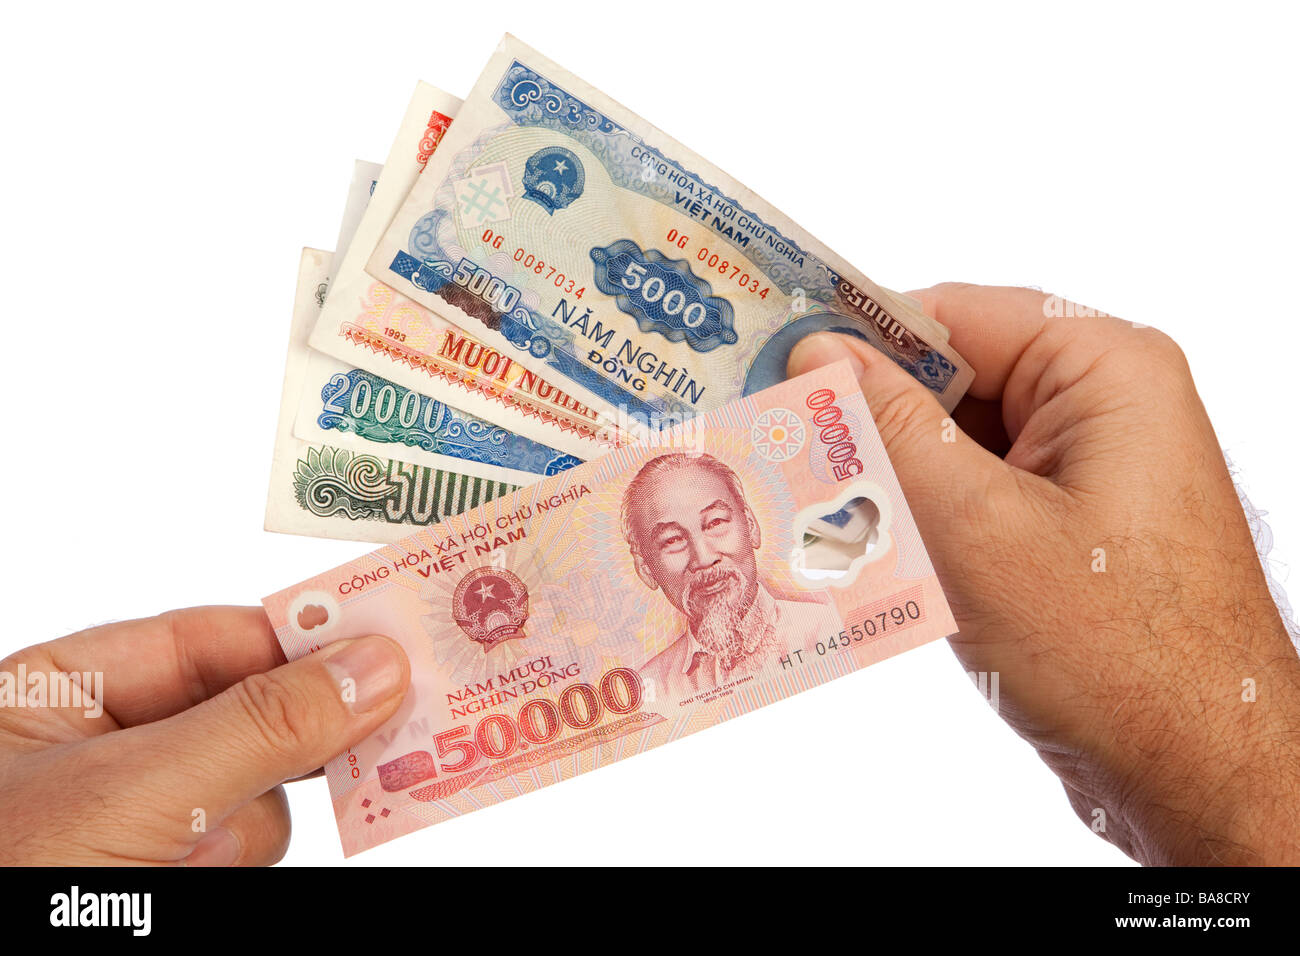 Money male hands holding handful of Vietnamese currency Stock Photo